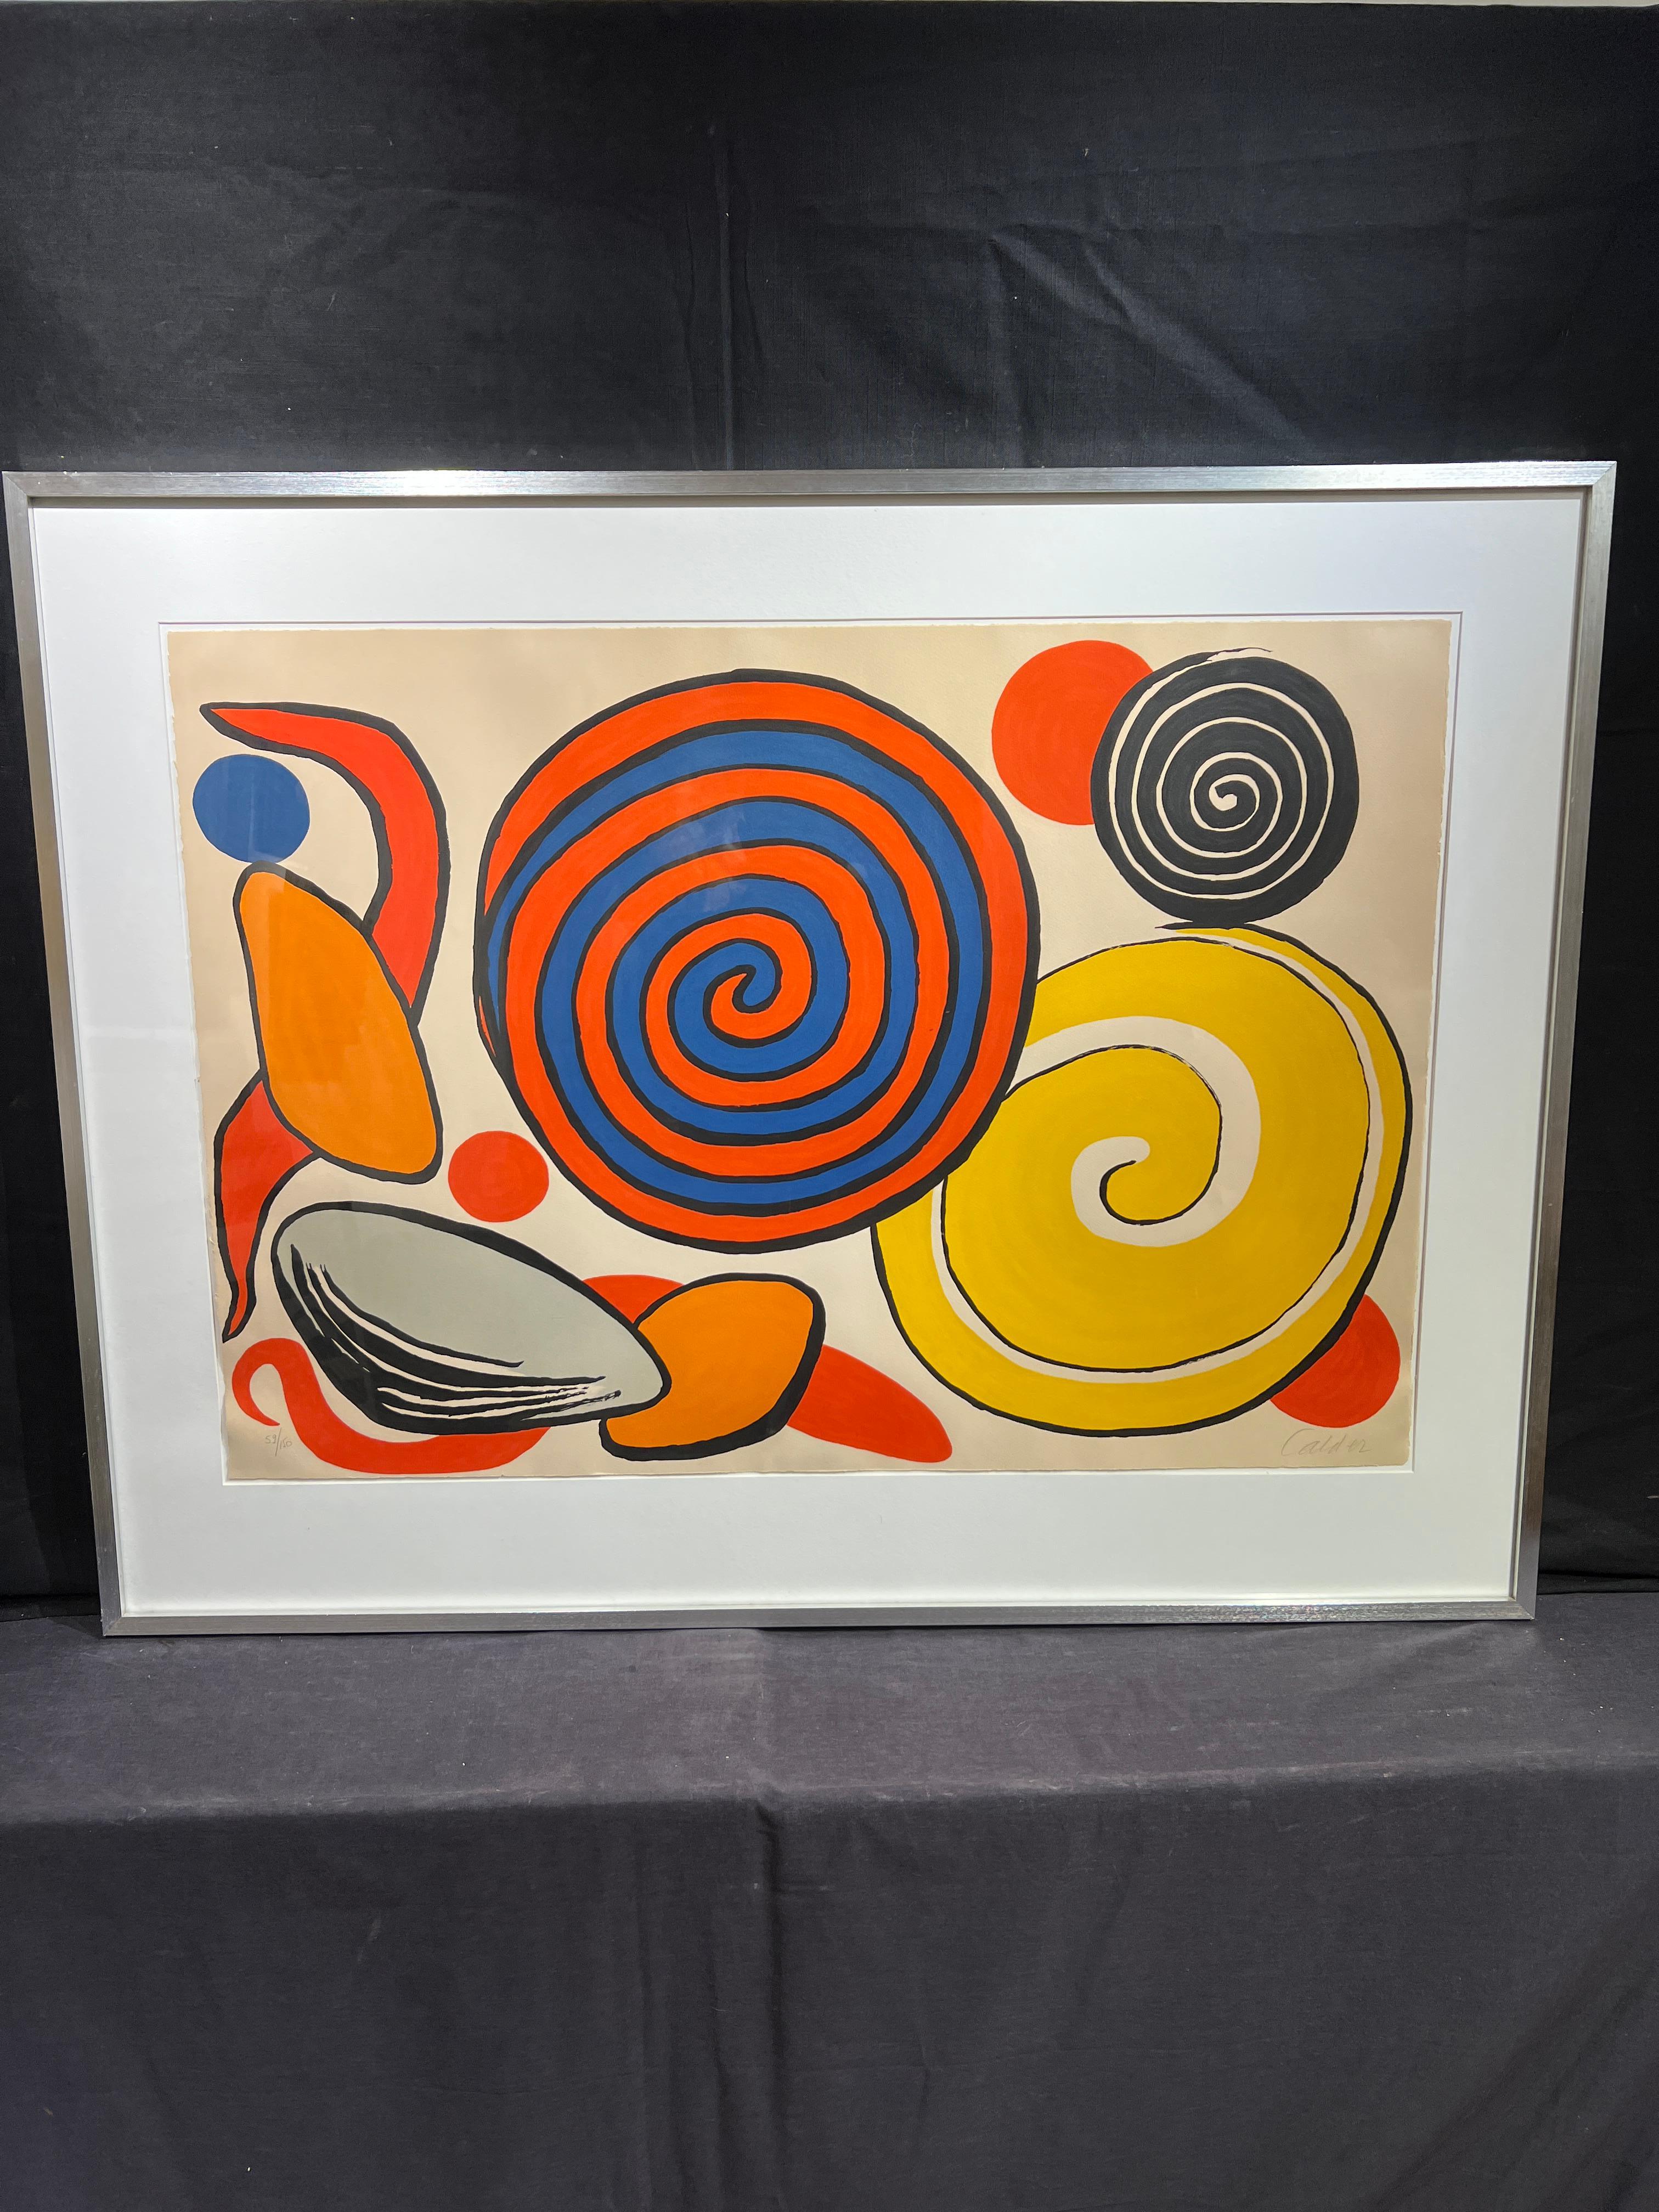 Red and Blue Spirals - Abstract Print by Alexander Calder